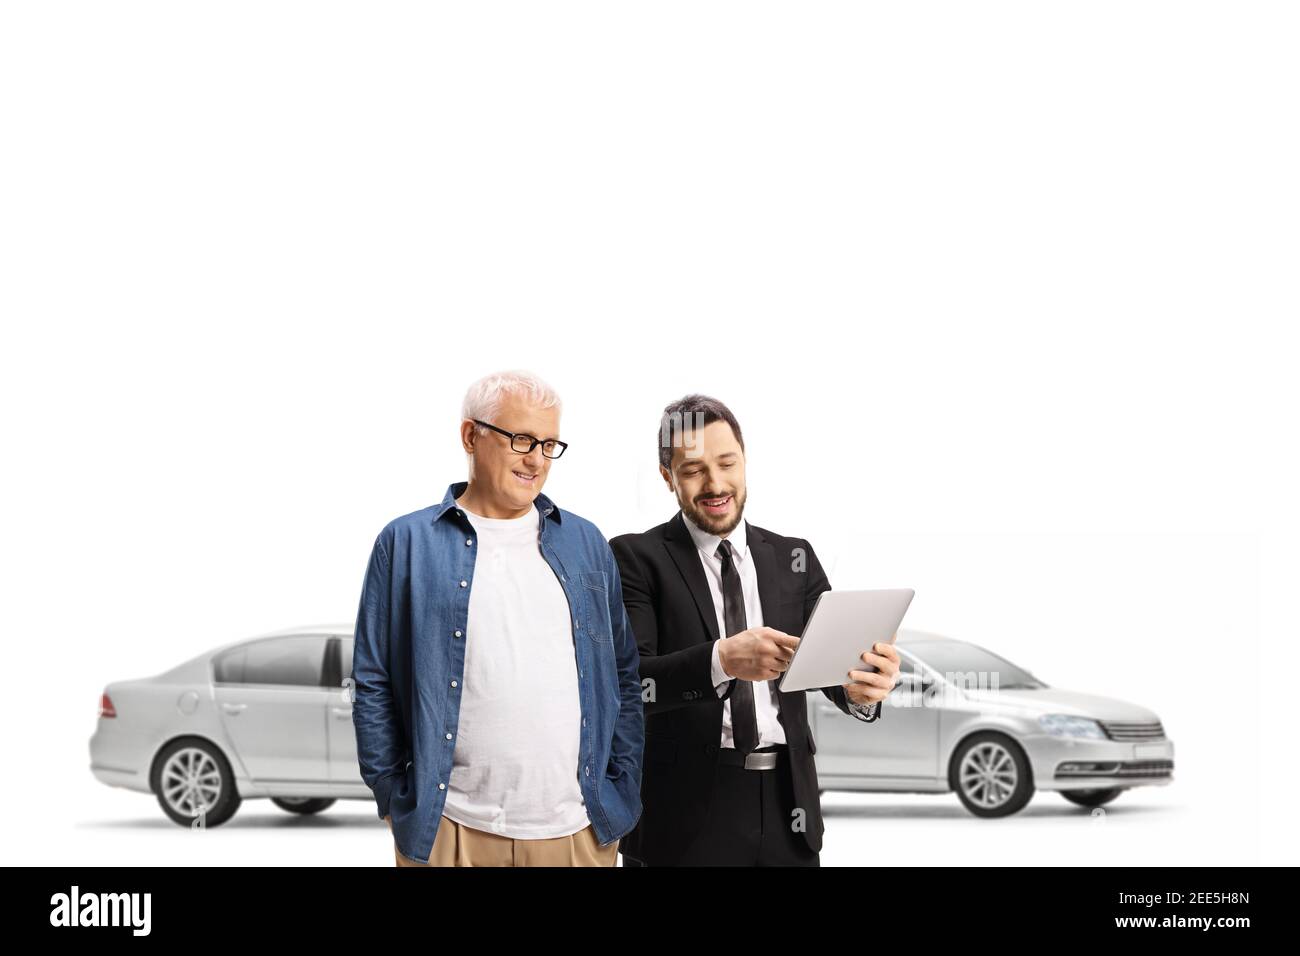 Car salesman and a mature customer looking at a tablet in a car showroom isolated on white background Stock Photo